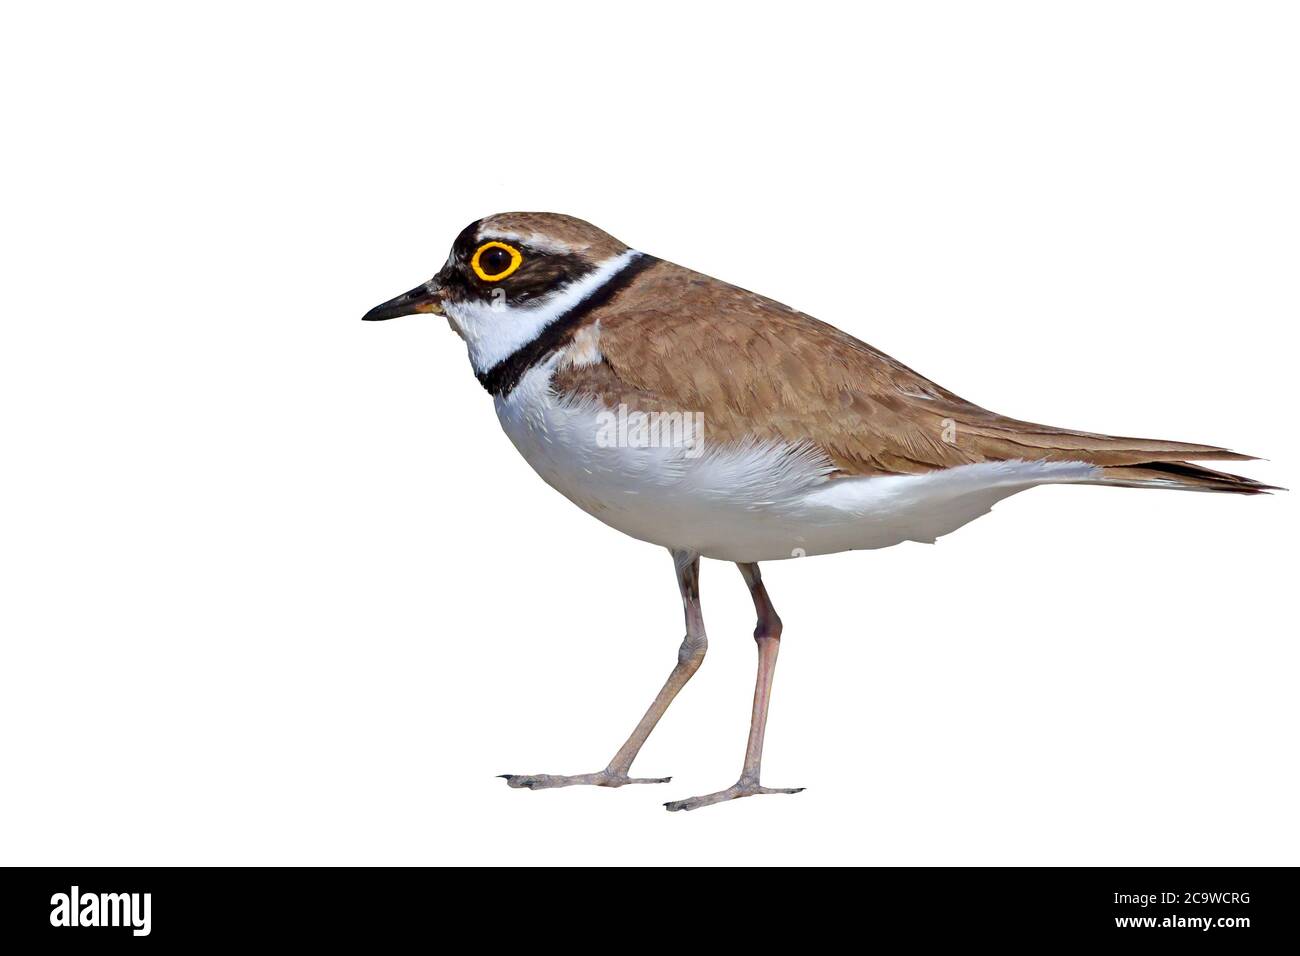 Cute little water bird. Isolated bird. White background. Little Ringed Plover. Charadrius dubius. Stock Photo